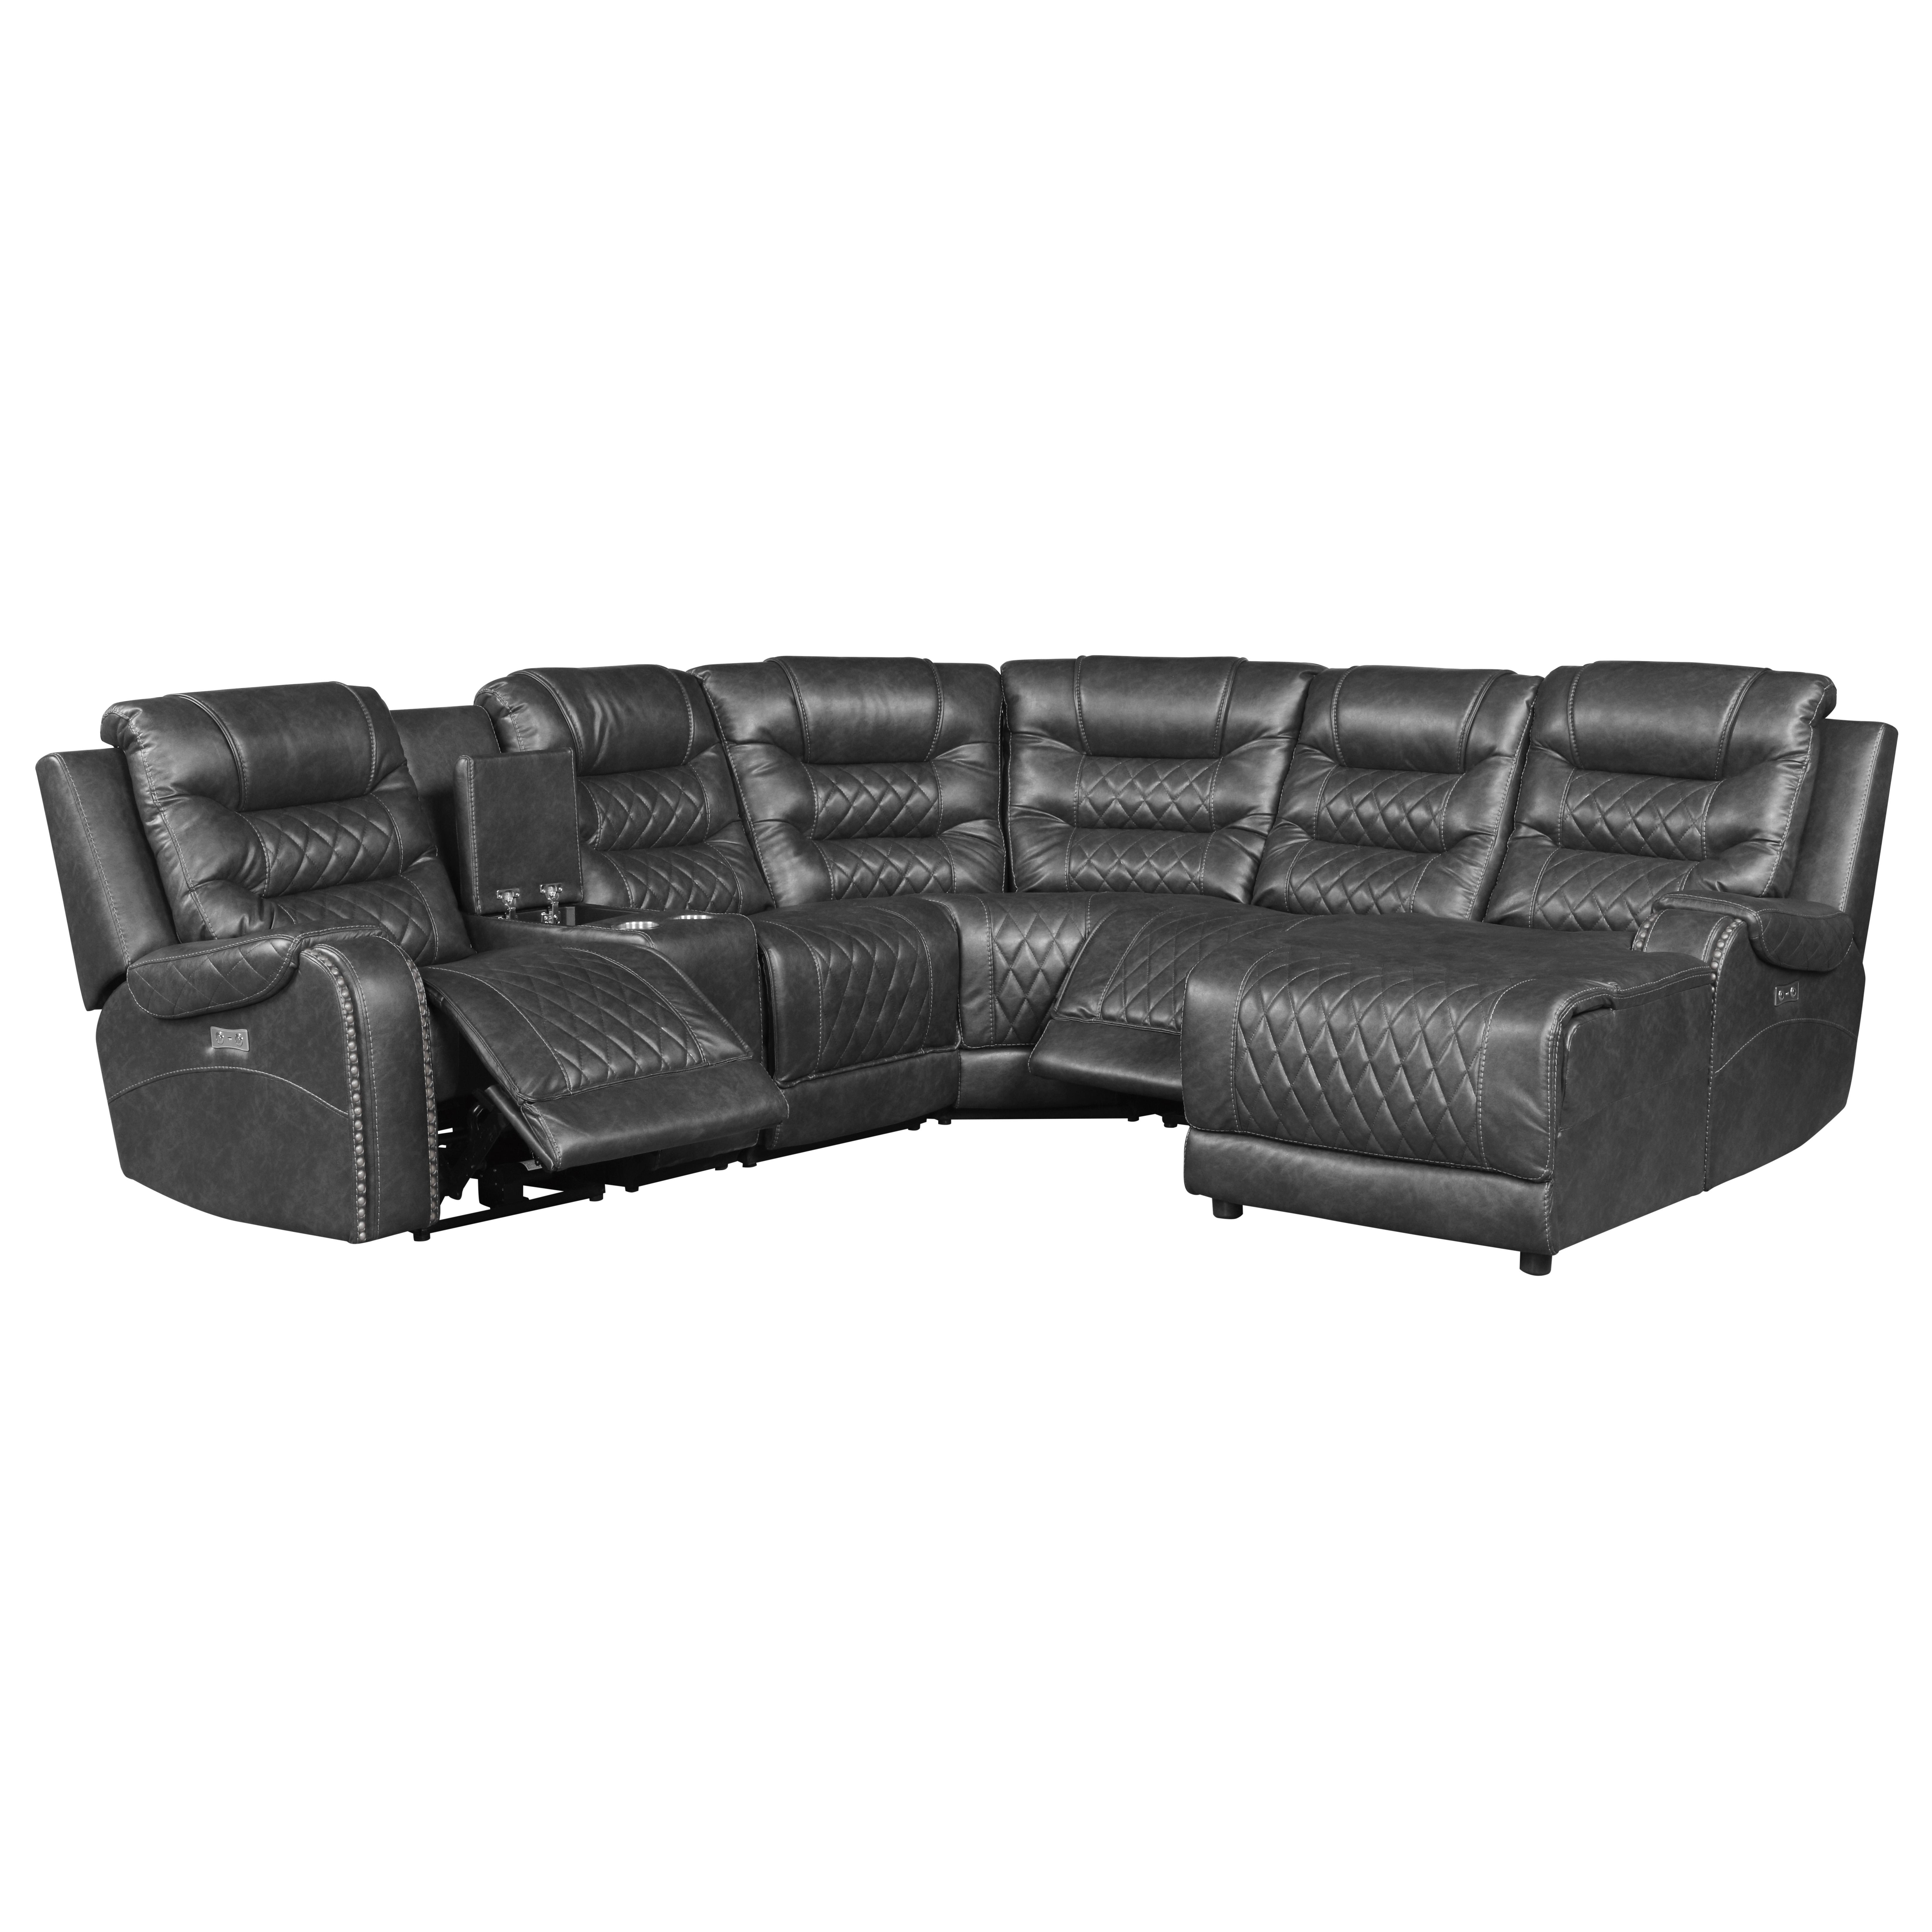 

    
Modern Gray Microfiber 6-Piece RSF Power Reclining Sectional Homelegance 9405GY*6LRRC Putnam
